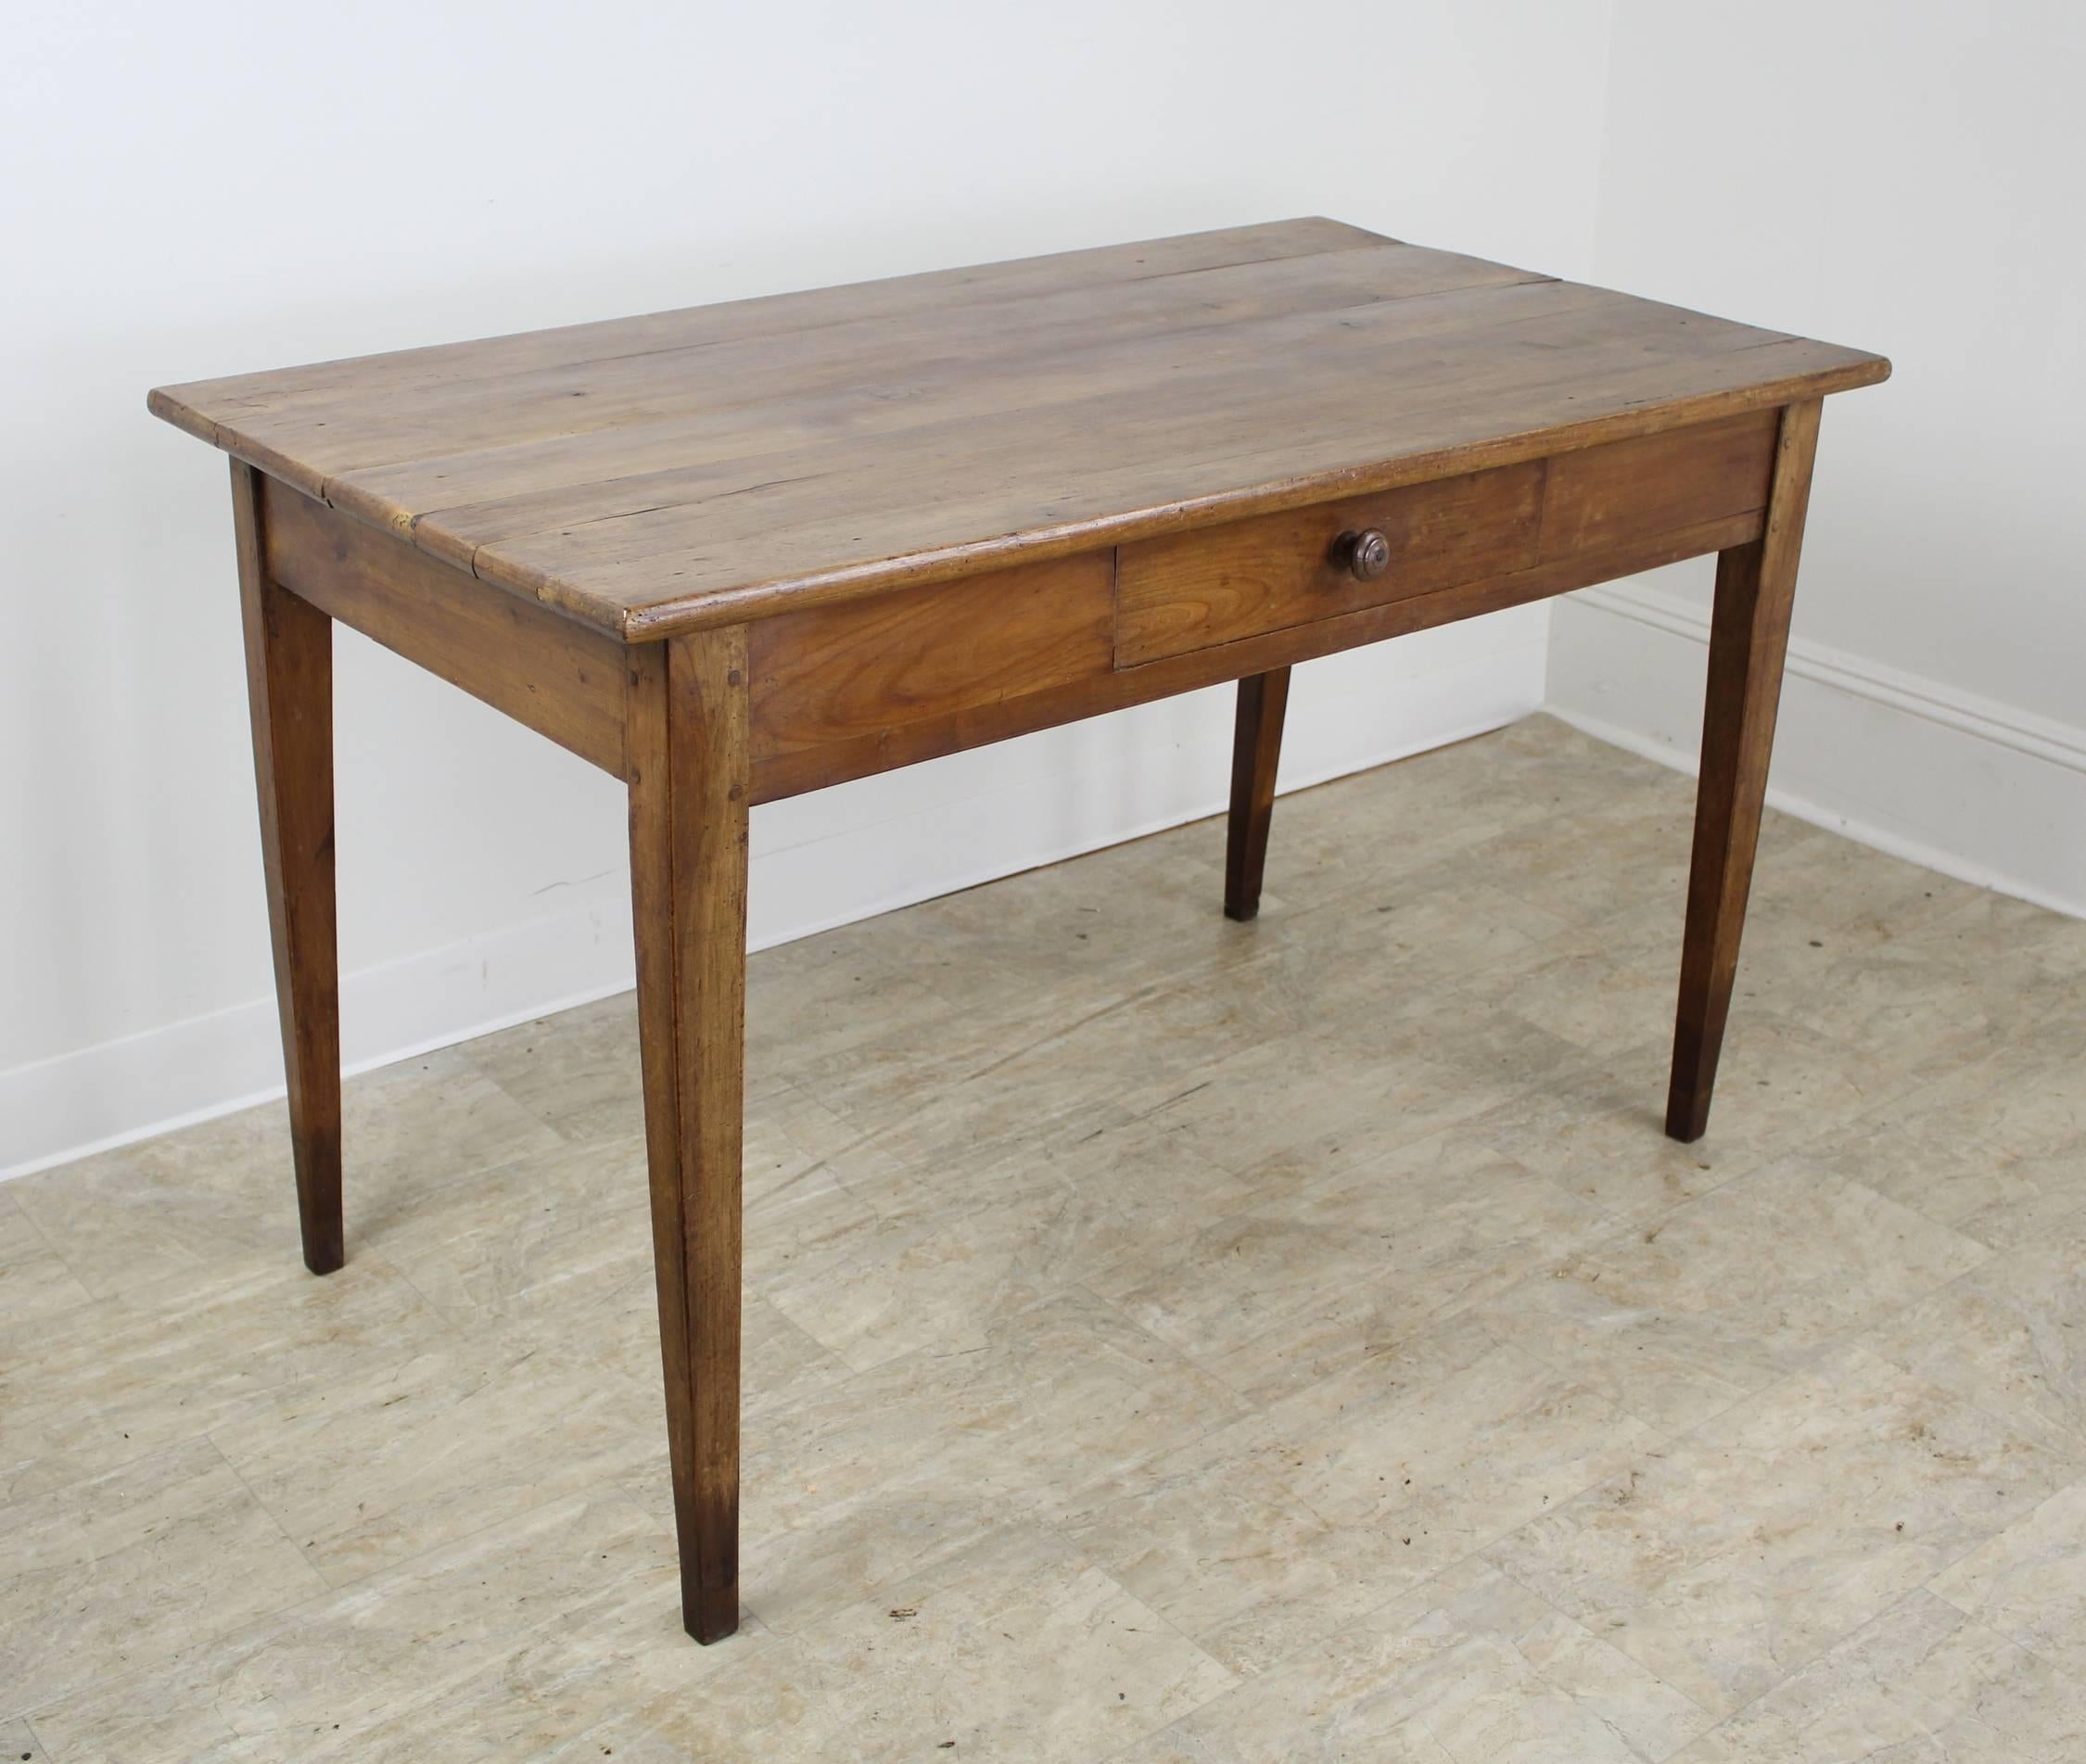 A splendid writing table in the warmest cherry with lovely grain and patina. The thin elegant legs and single centre drawer complete the look. Lovely little hand-turned knob. Apron height of 24 inches is very comfortable. Leg height was extended,